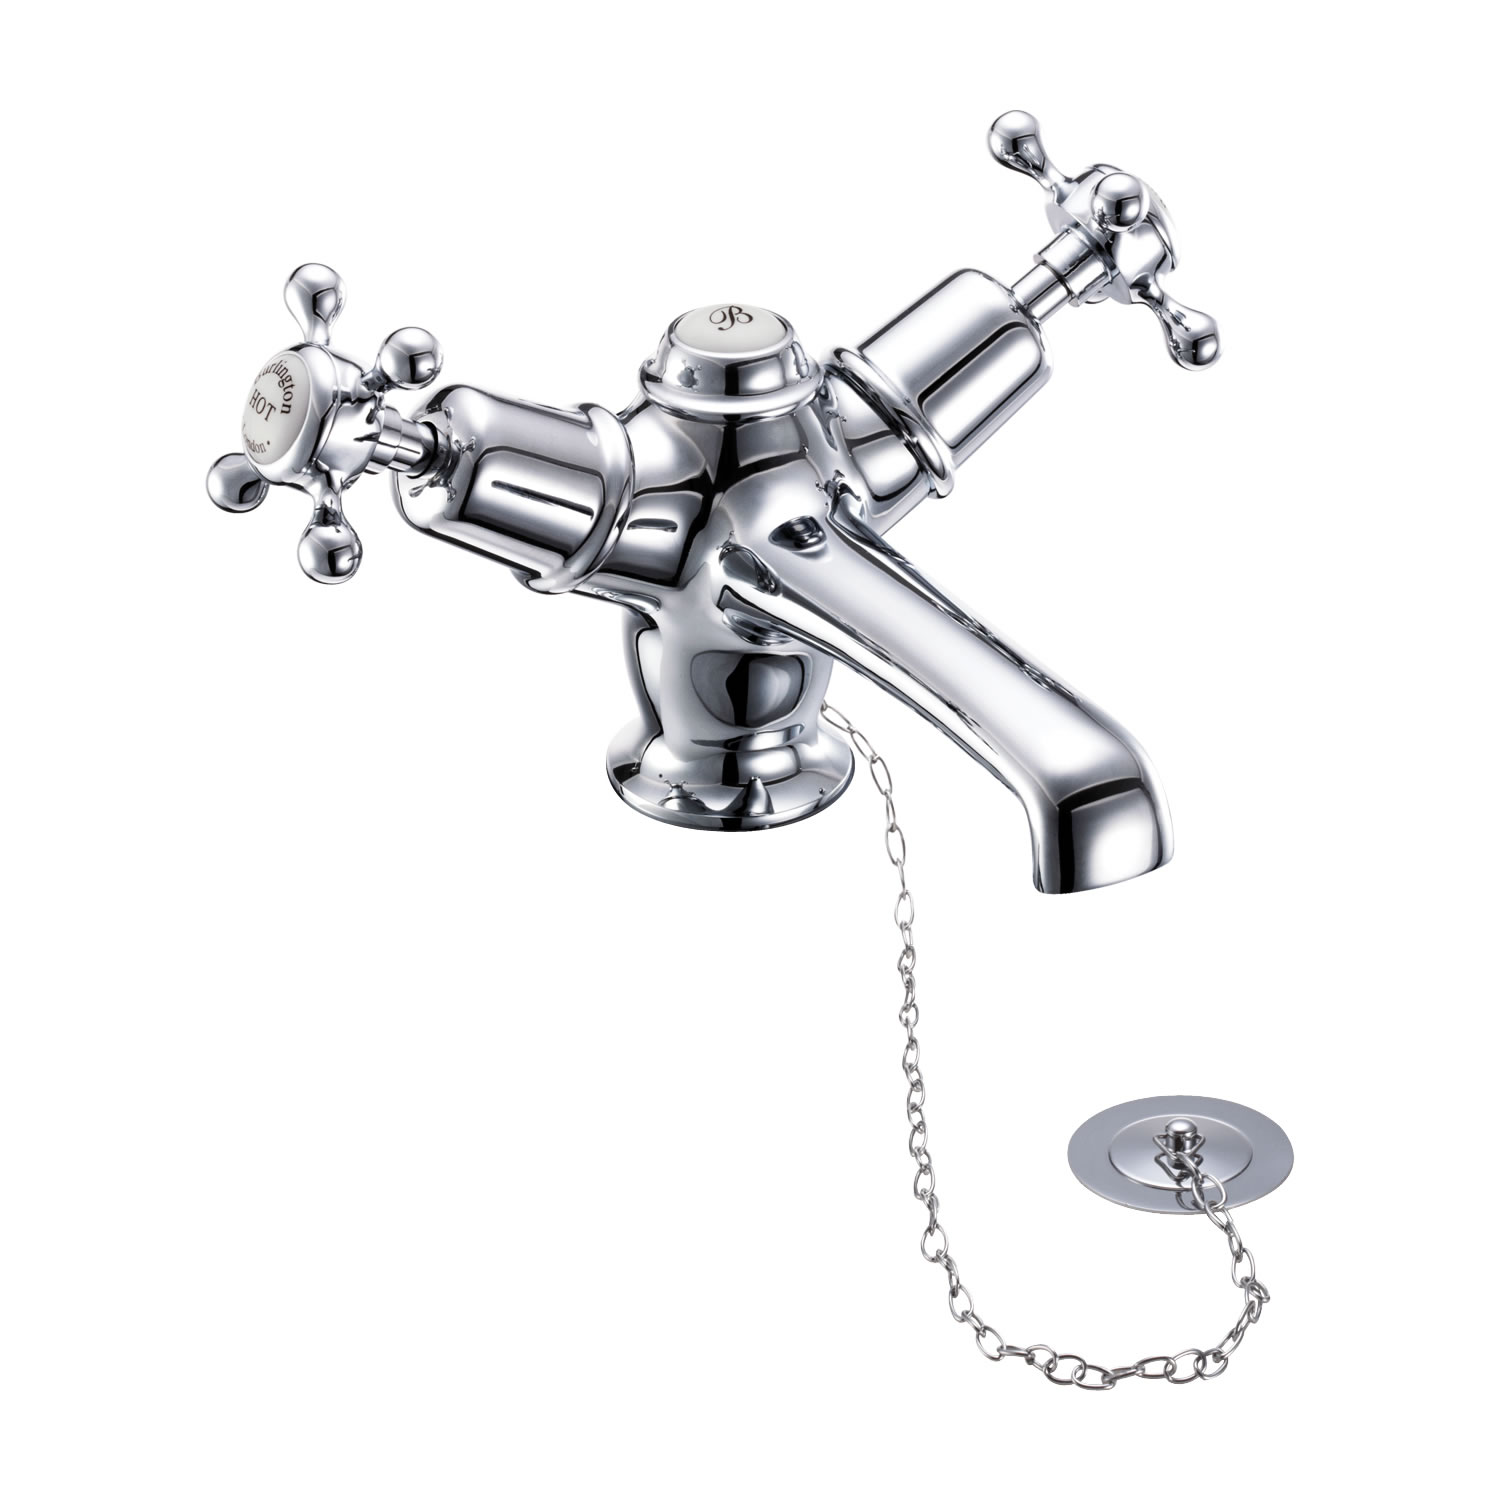 Claremont basin mixer with low central indice with plug and chain waste